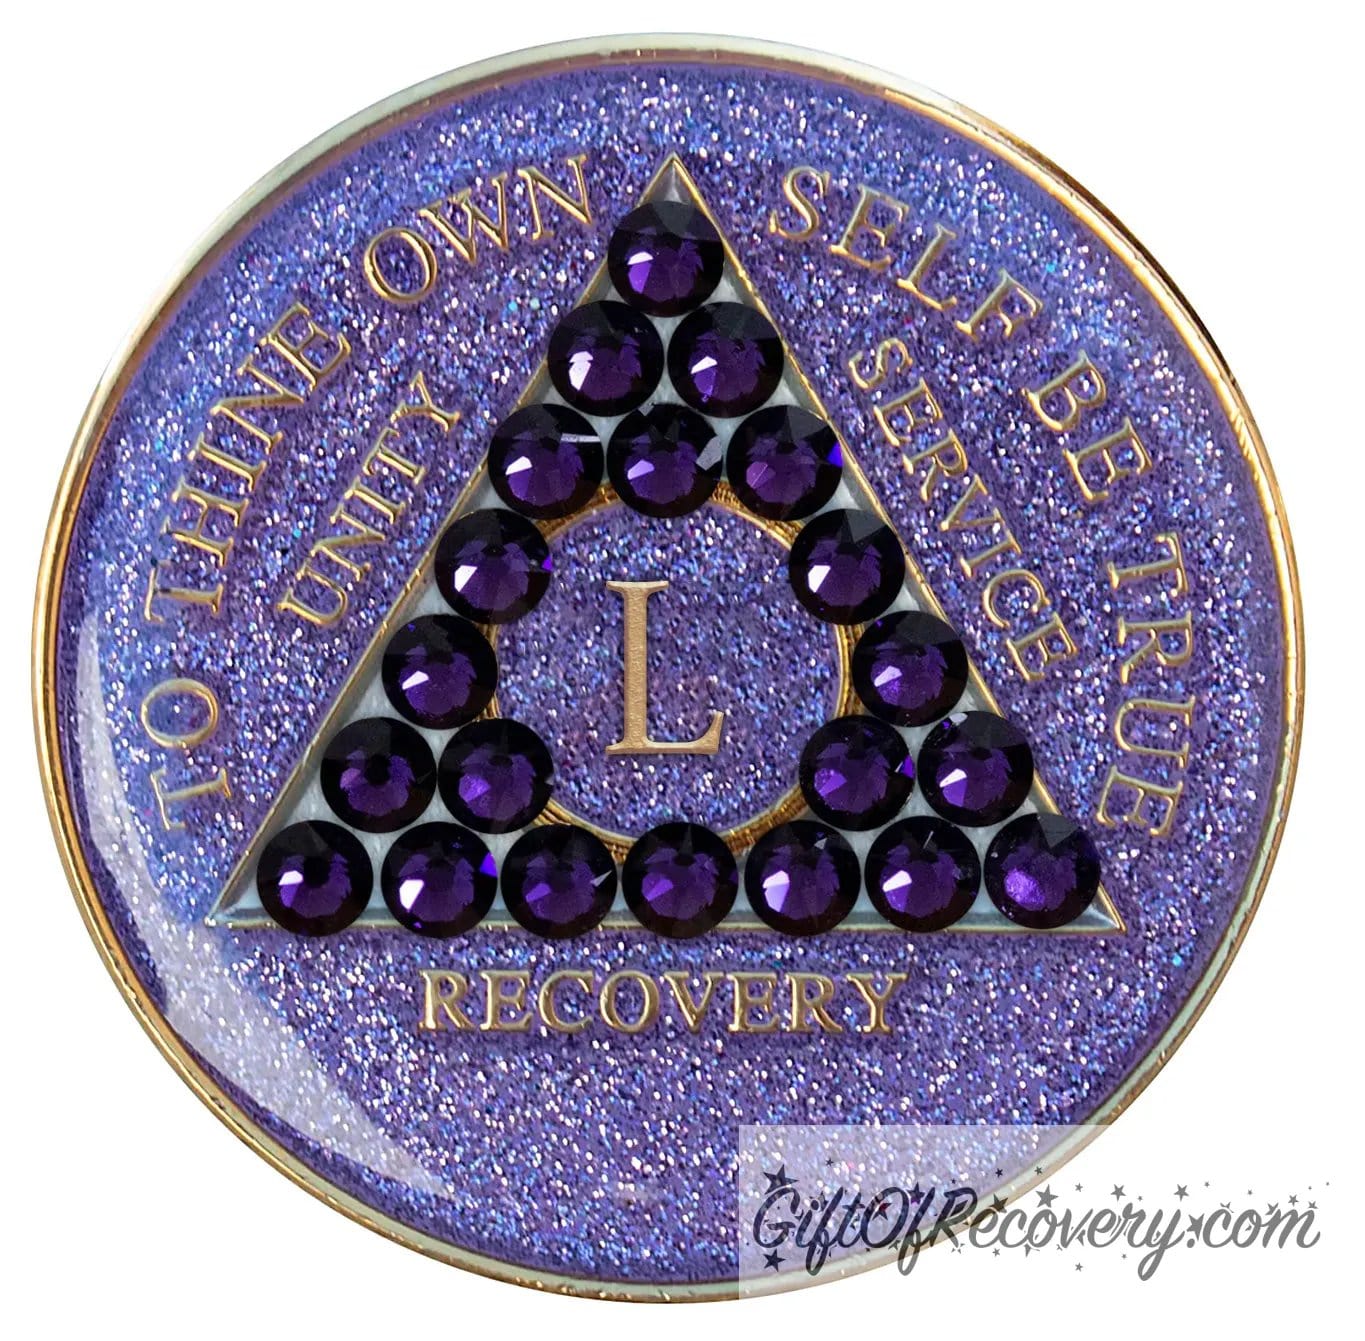 50 year glitter purple AA medallion with 21 purple velvet genuine crystals, that create the triangle in middle, and to thine own self be true, unity, service, recovery, the roman numeral in the center of the circle triangle, along with the rim of the recovery medallion, are embossed in 14 gold plated brass, sealed in resin for glossy finish.